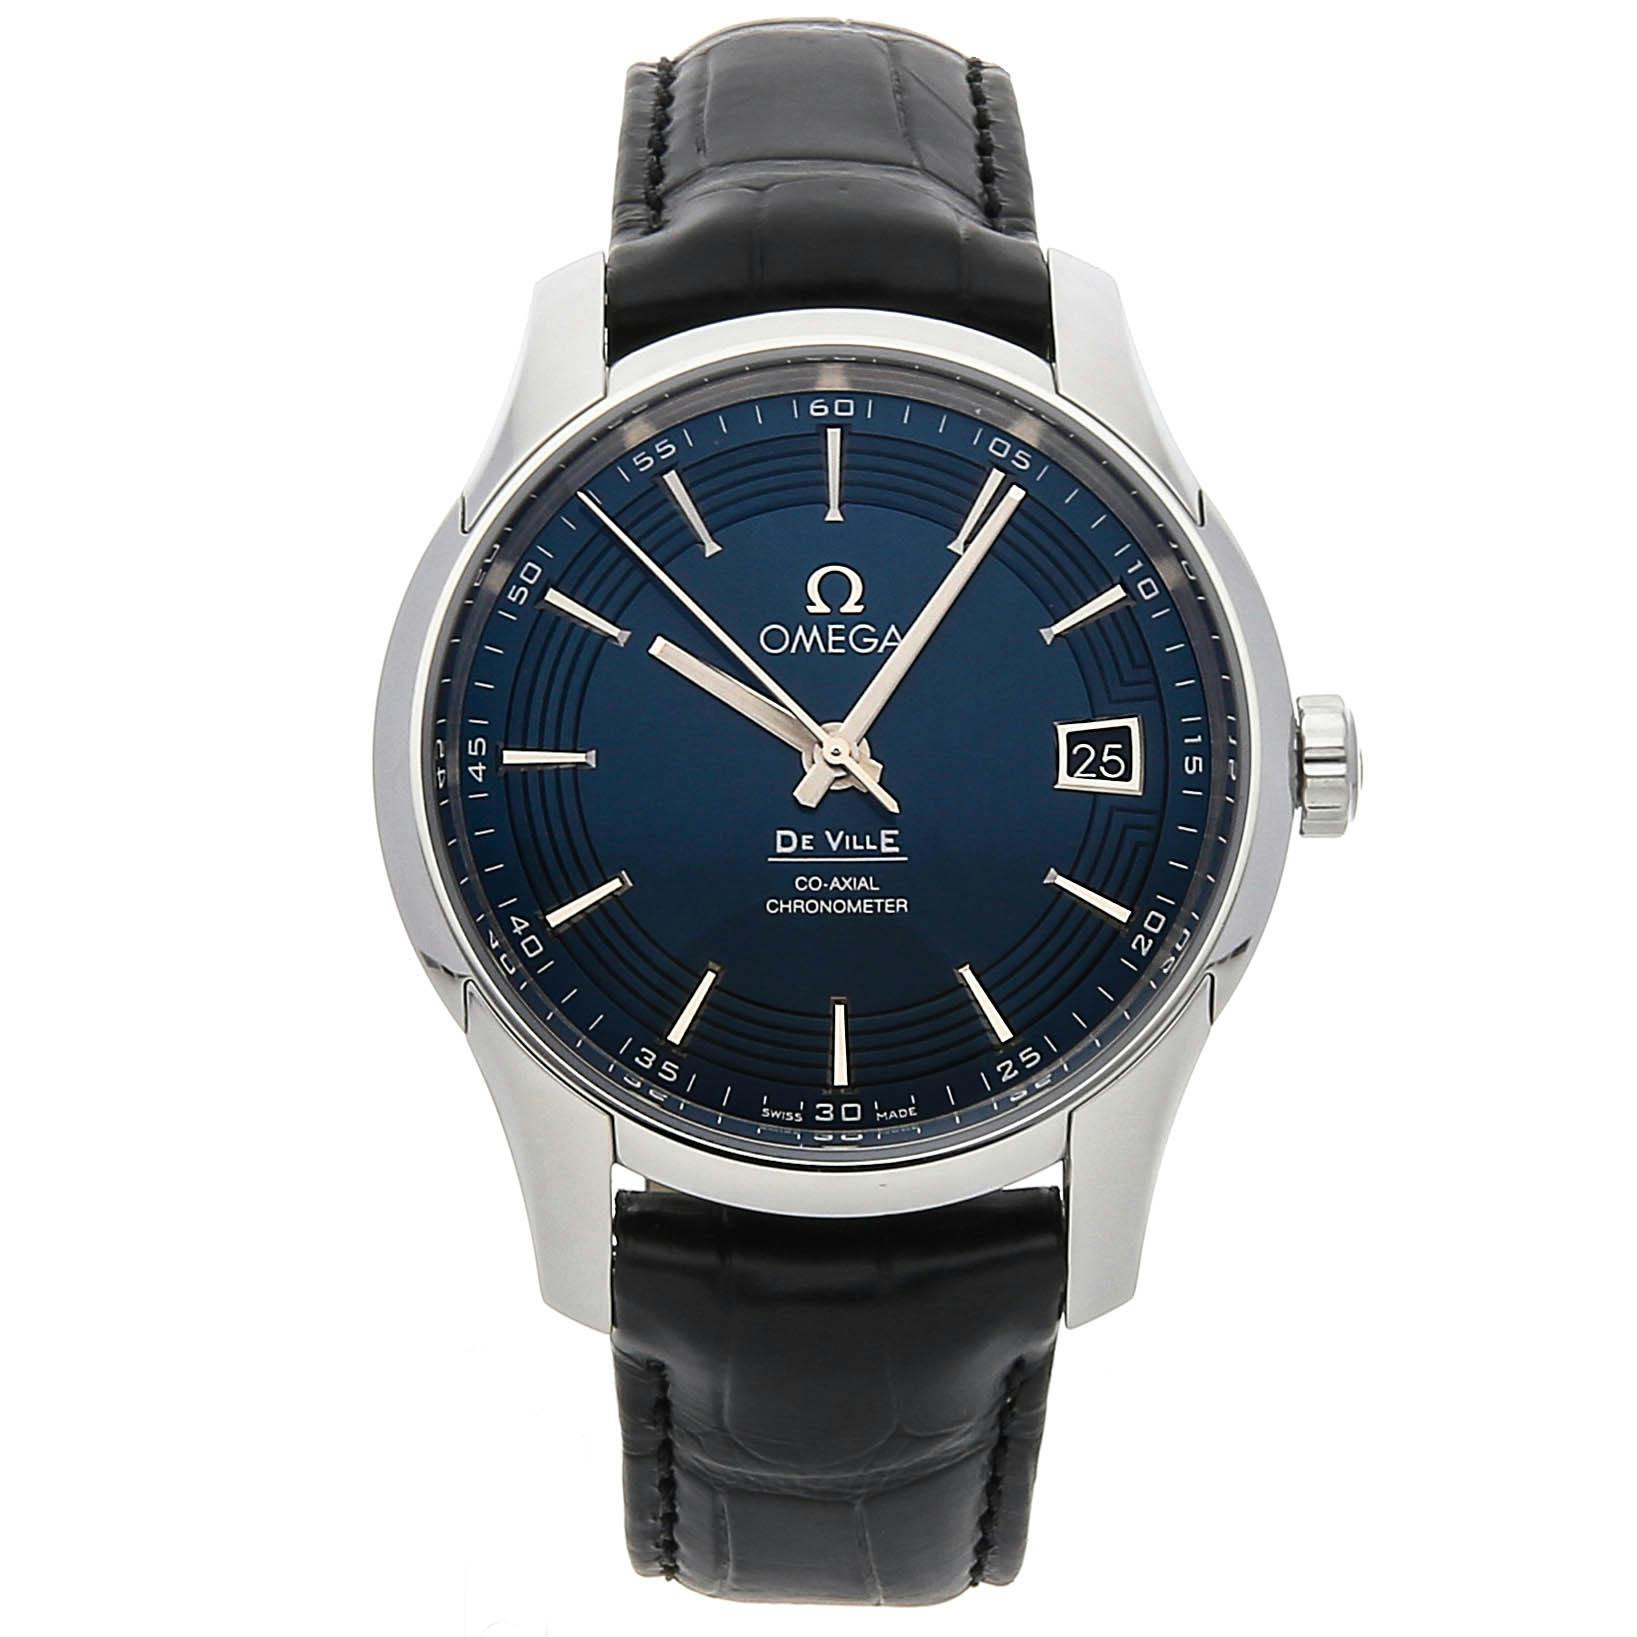 Certified Pre-Owned Omega Watches | WatchBox